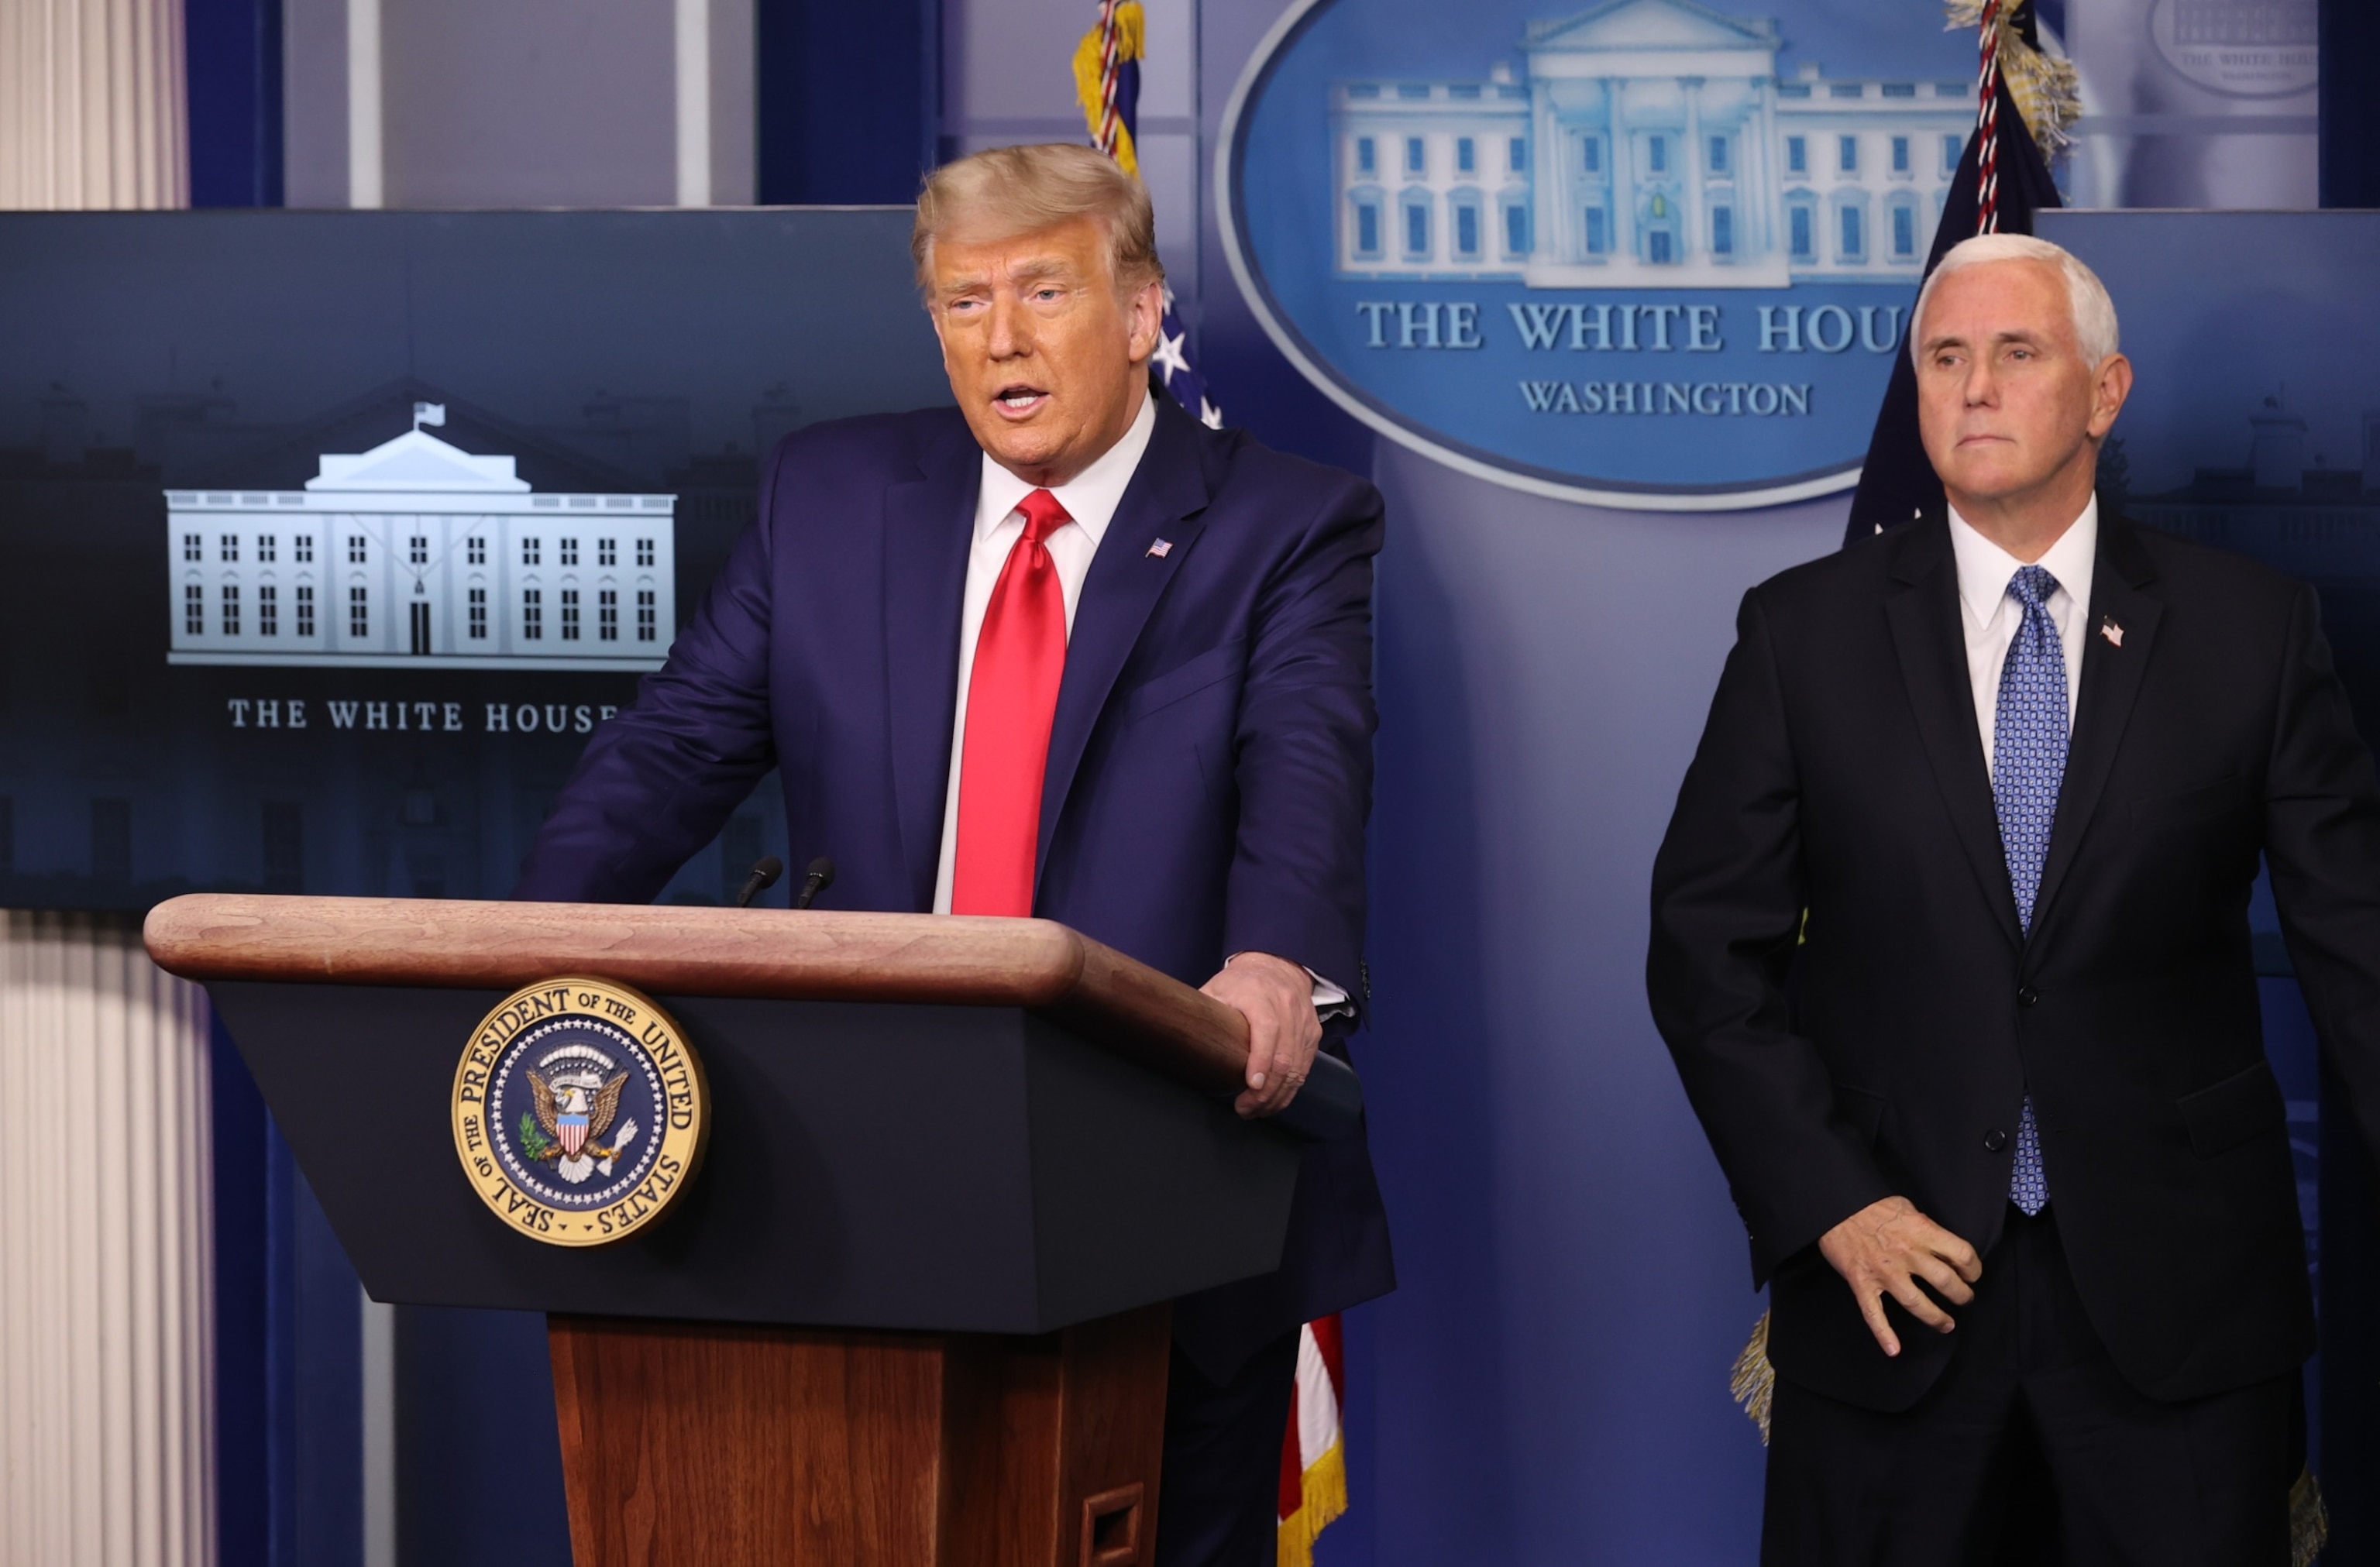 PHOTO: In this Nov. 24, 2020 file photo President Donald Trump and Vice President Mike Pence prepare to speak to the press in the James Brady Press Briefing Room at the White House on in Washington, D.C.